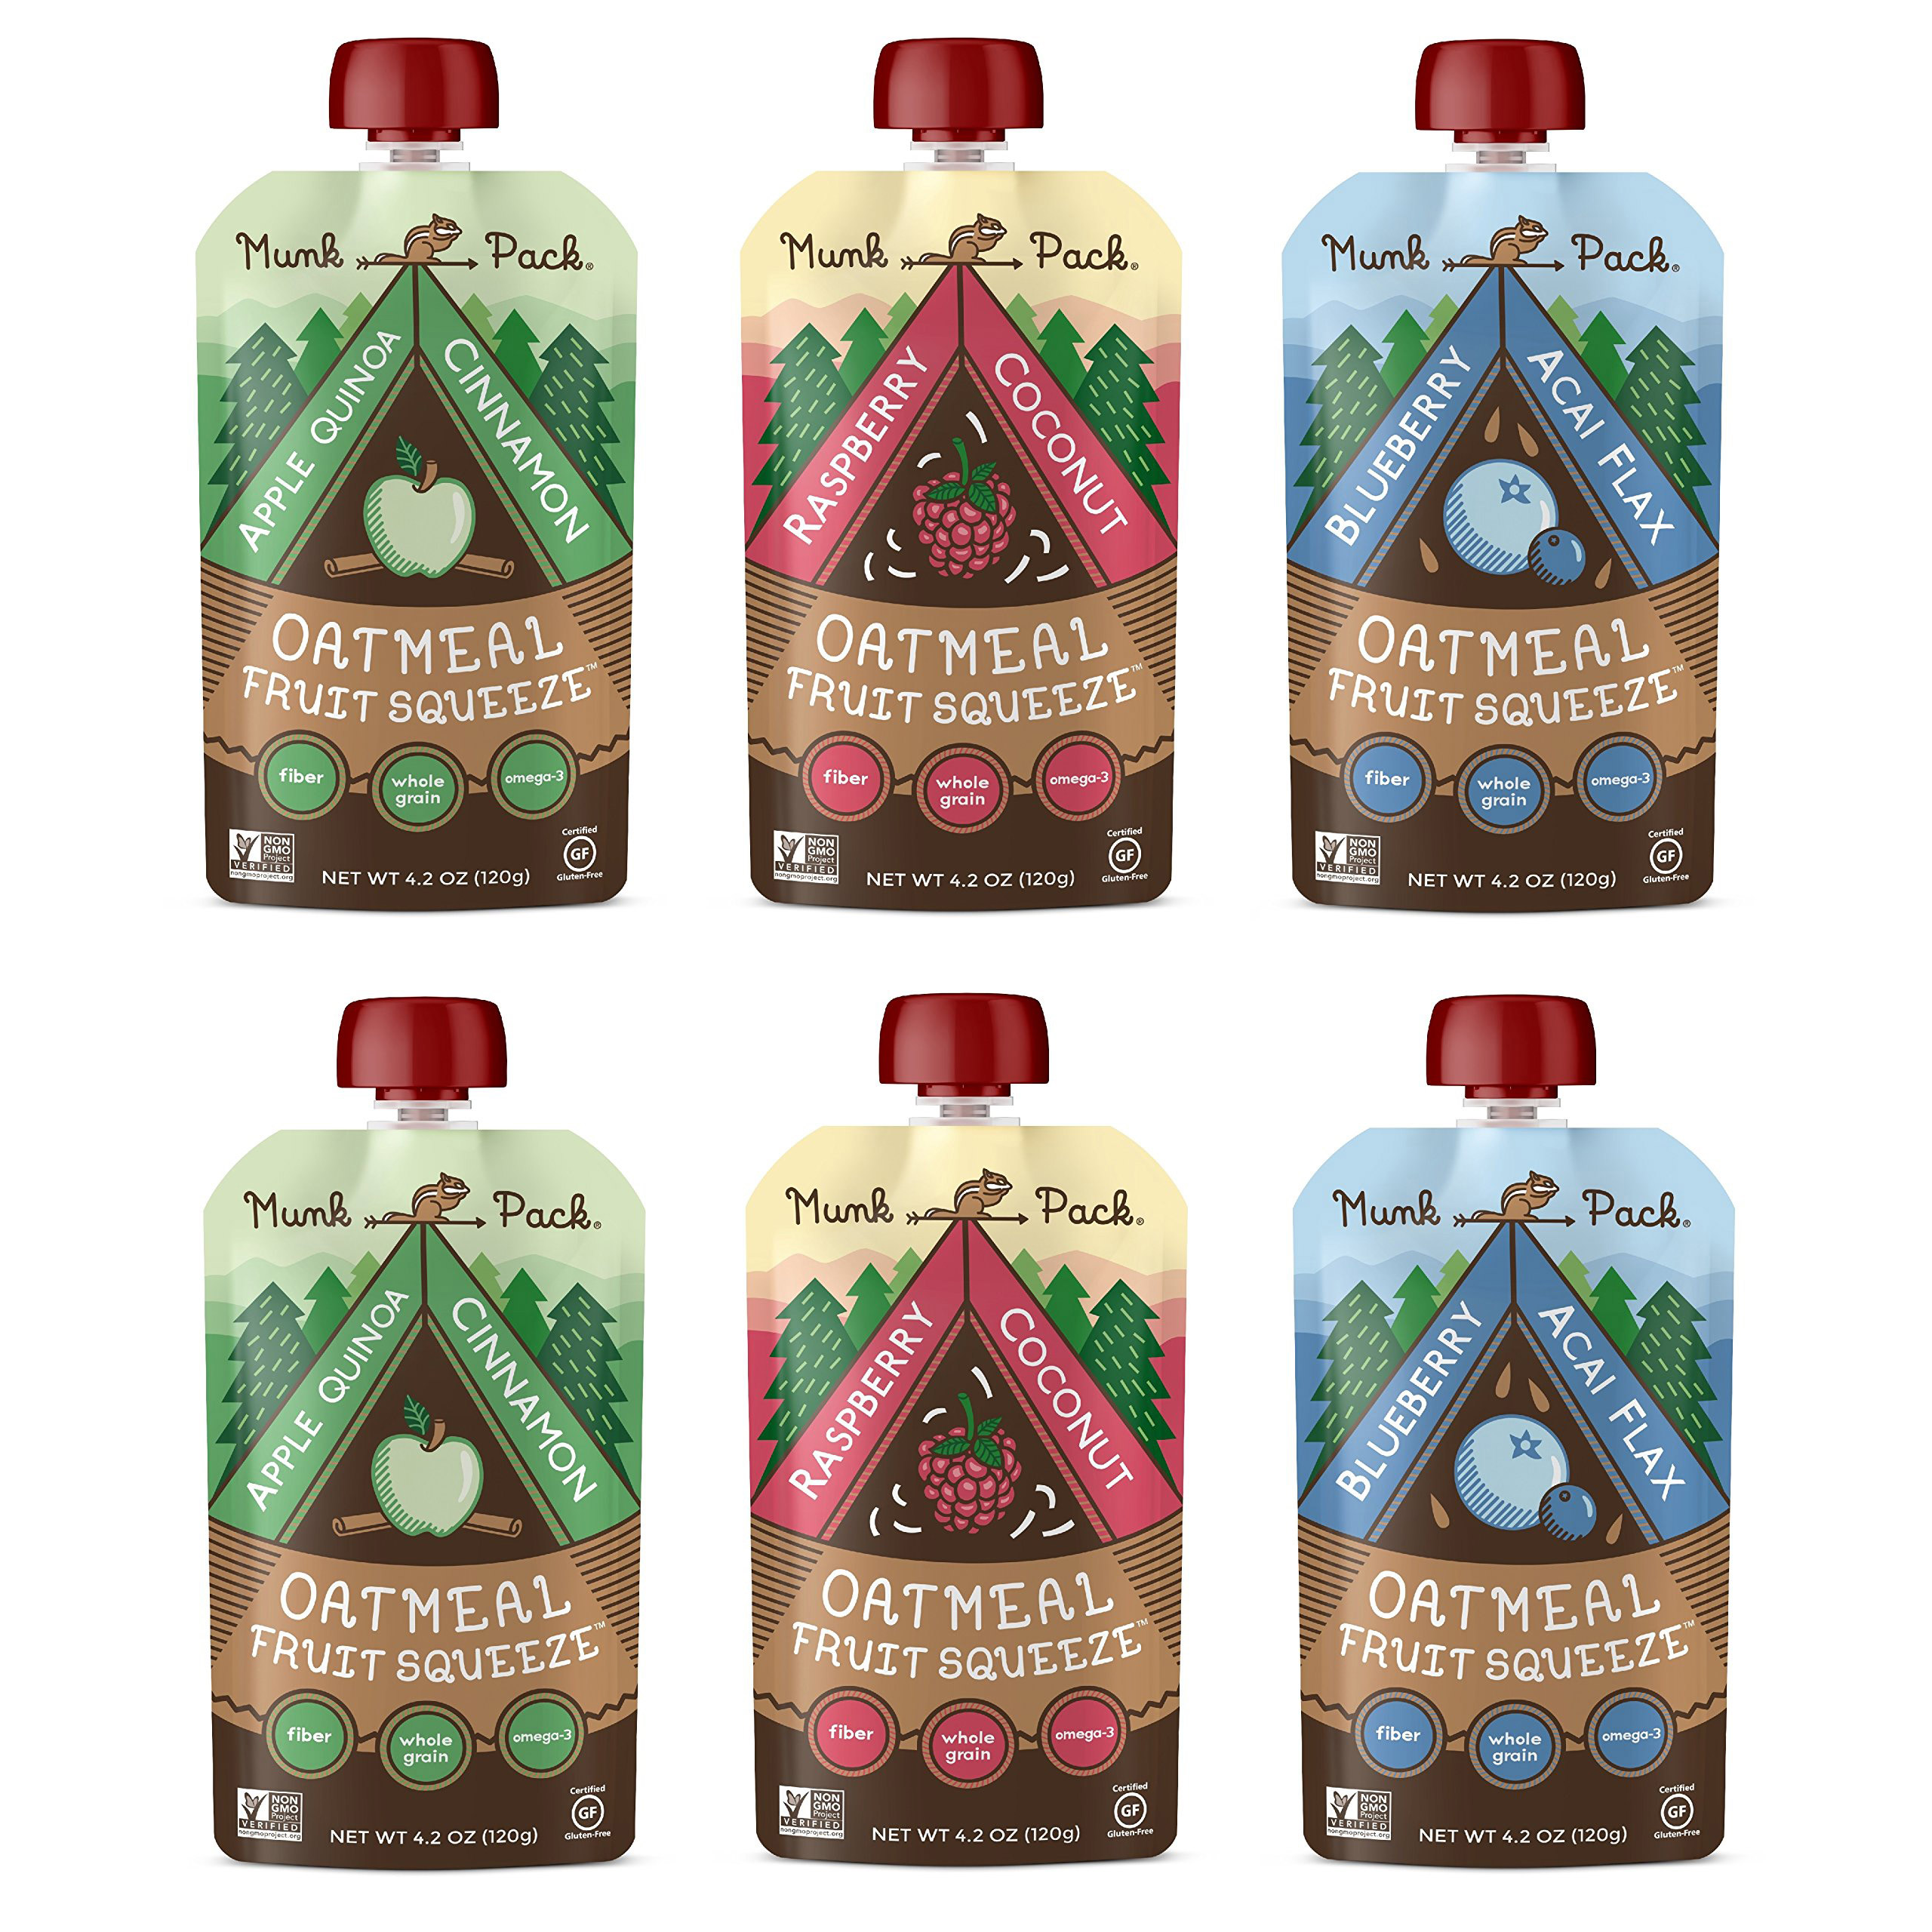 Munk Pack Oatmeal Fruit Squeeze | Variety Pack, Ready-to-Eat Oatmeal On The Go, 4.2 oz, 6 Pack